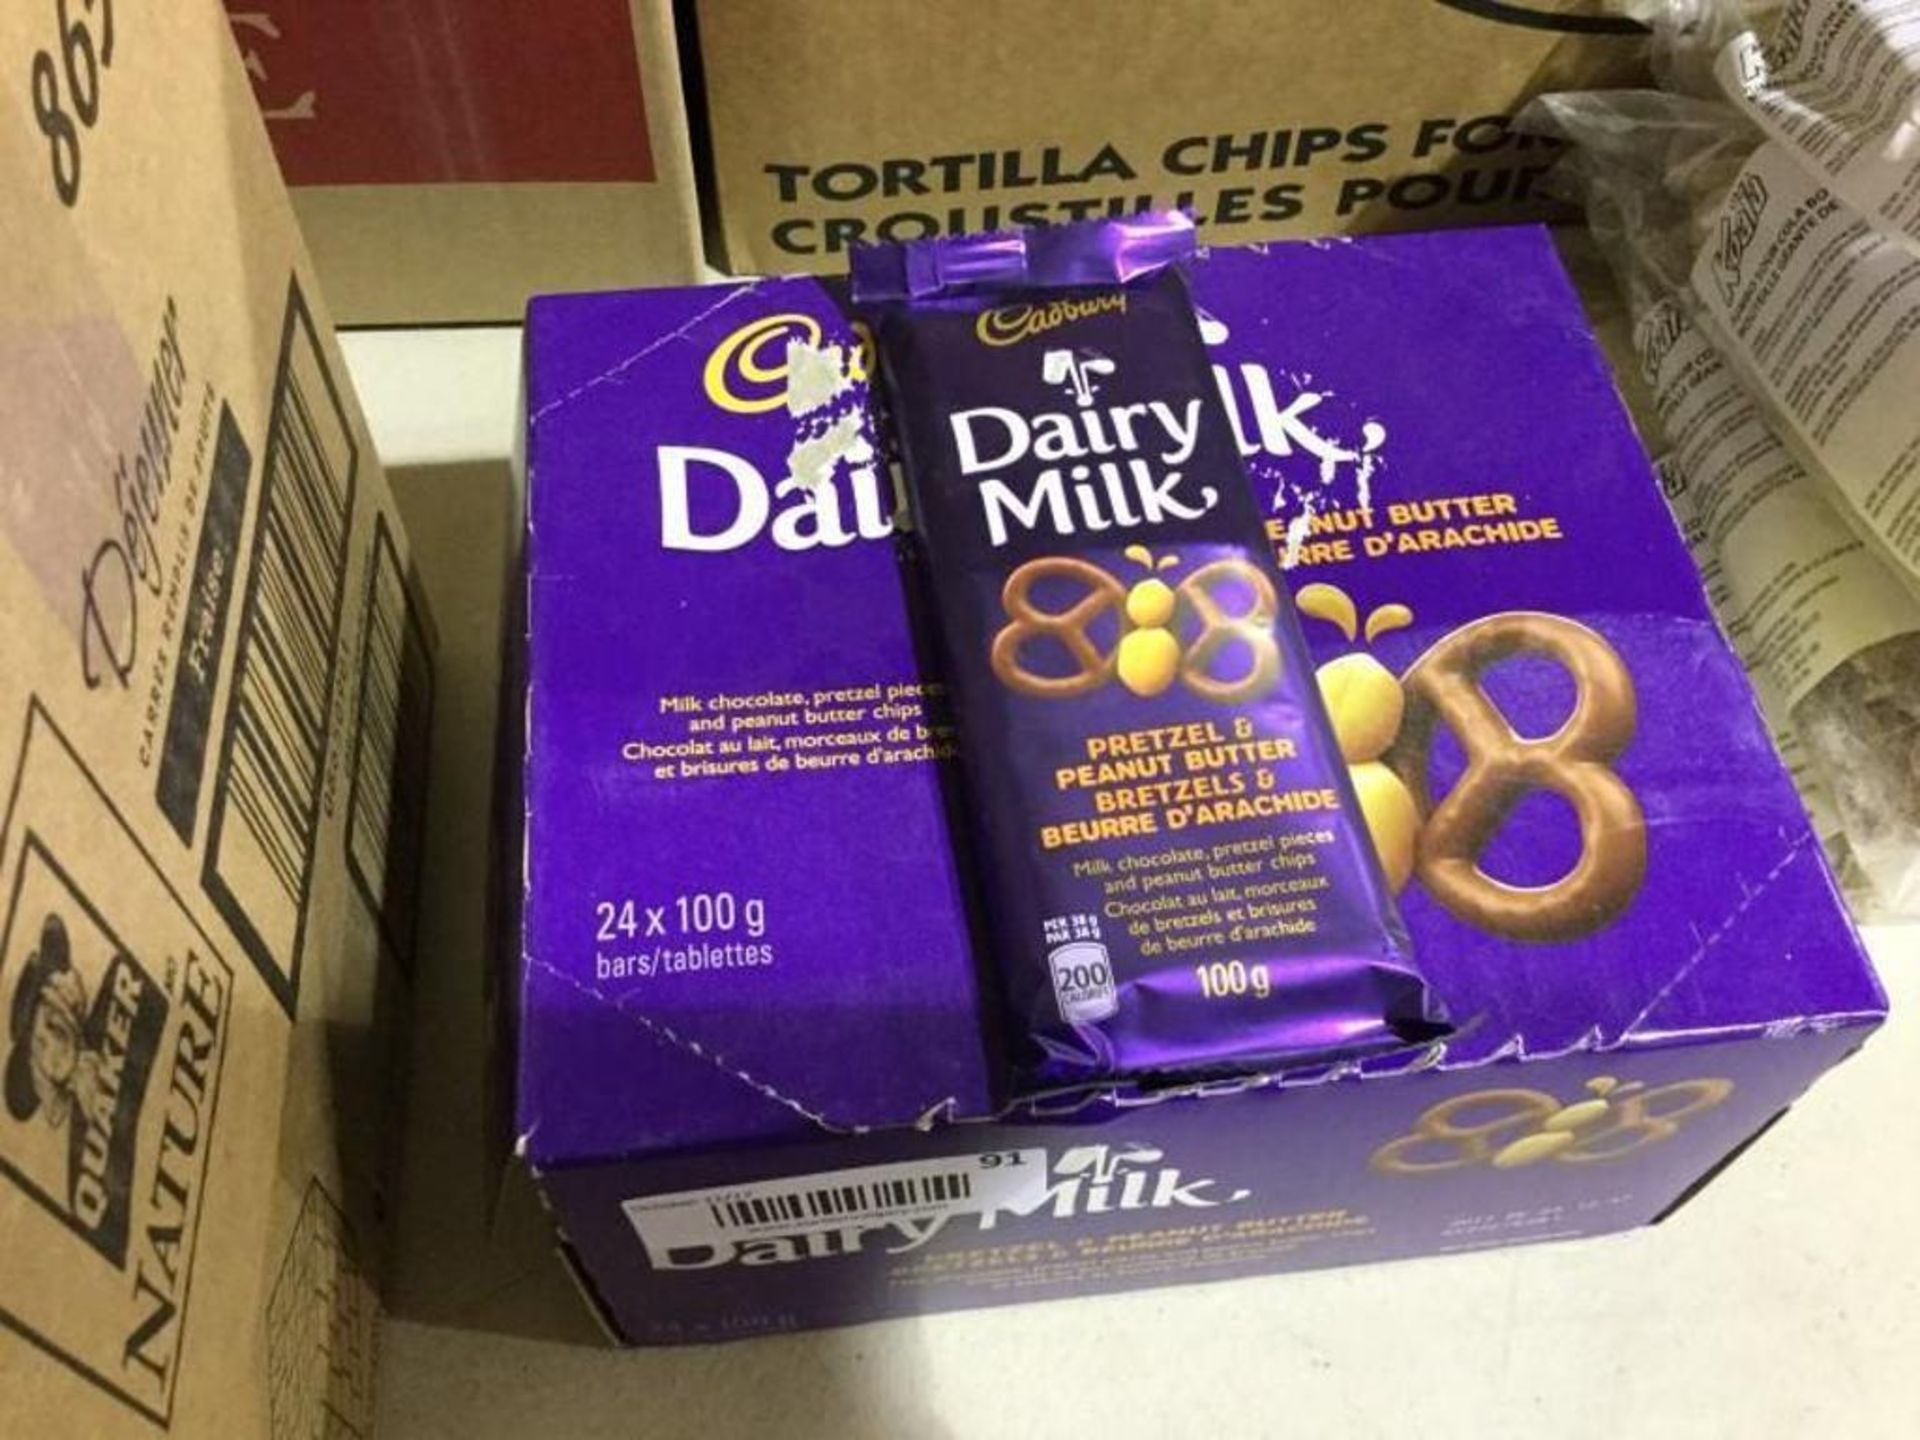 Case of Dairy Milk Pretzel and Peanut Butter Chocolate Bars